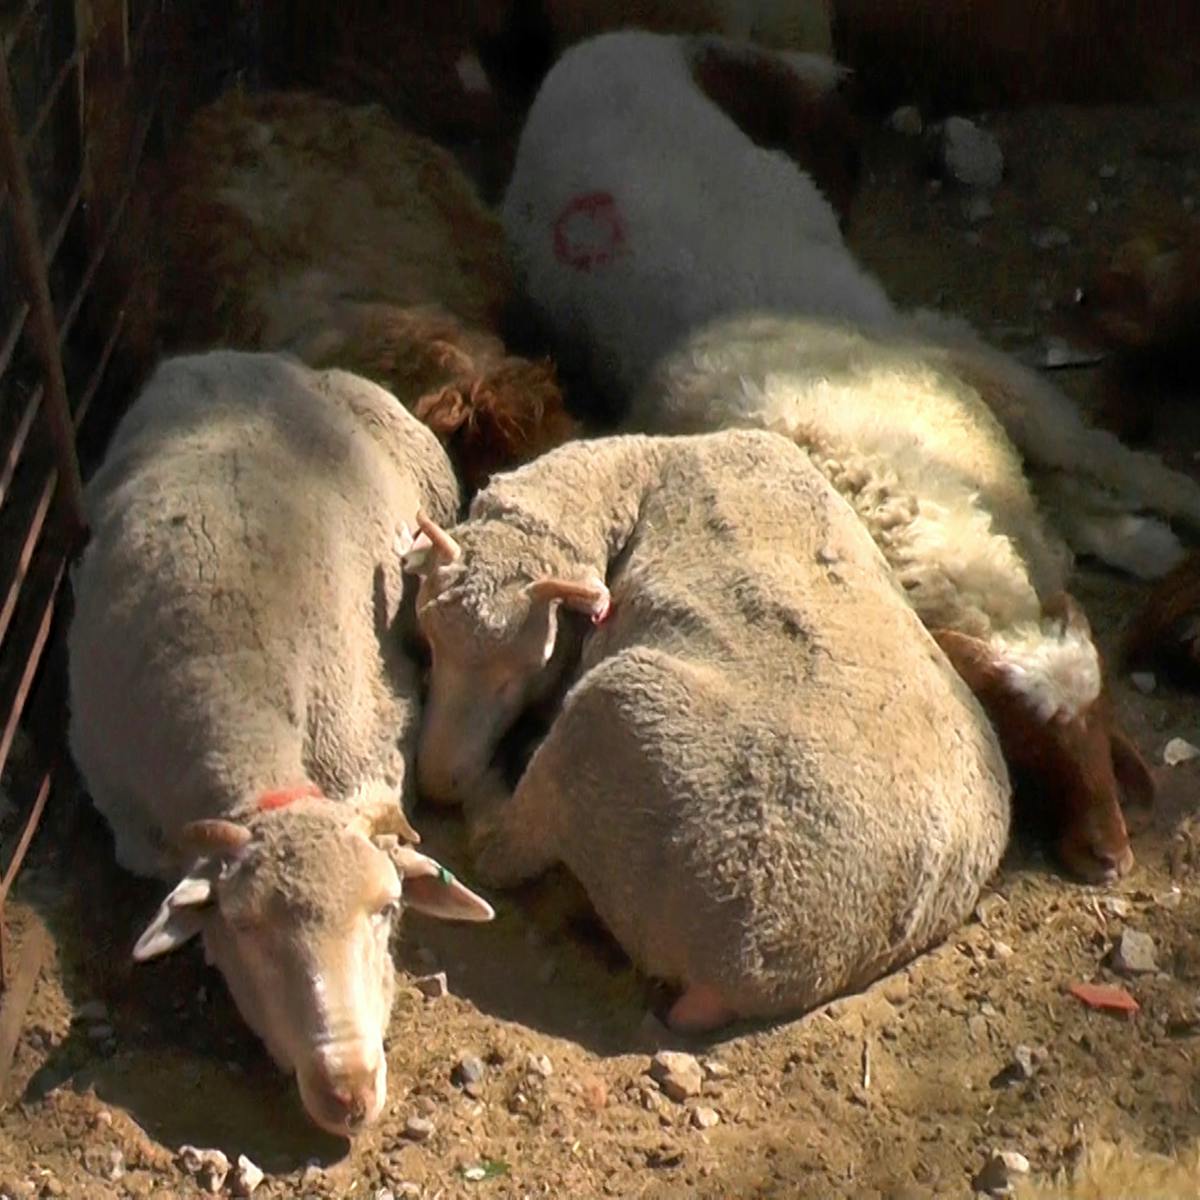 Can live animal export ever be humane?